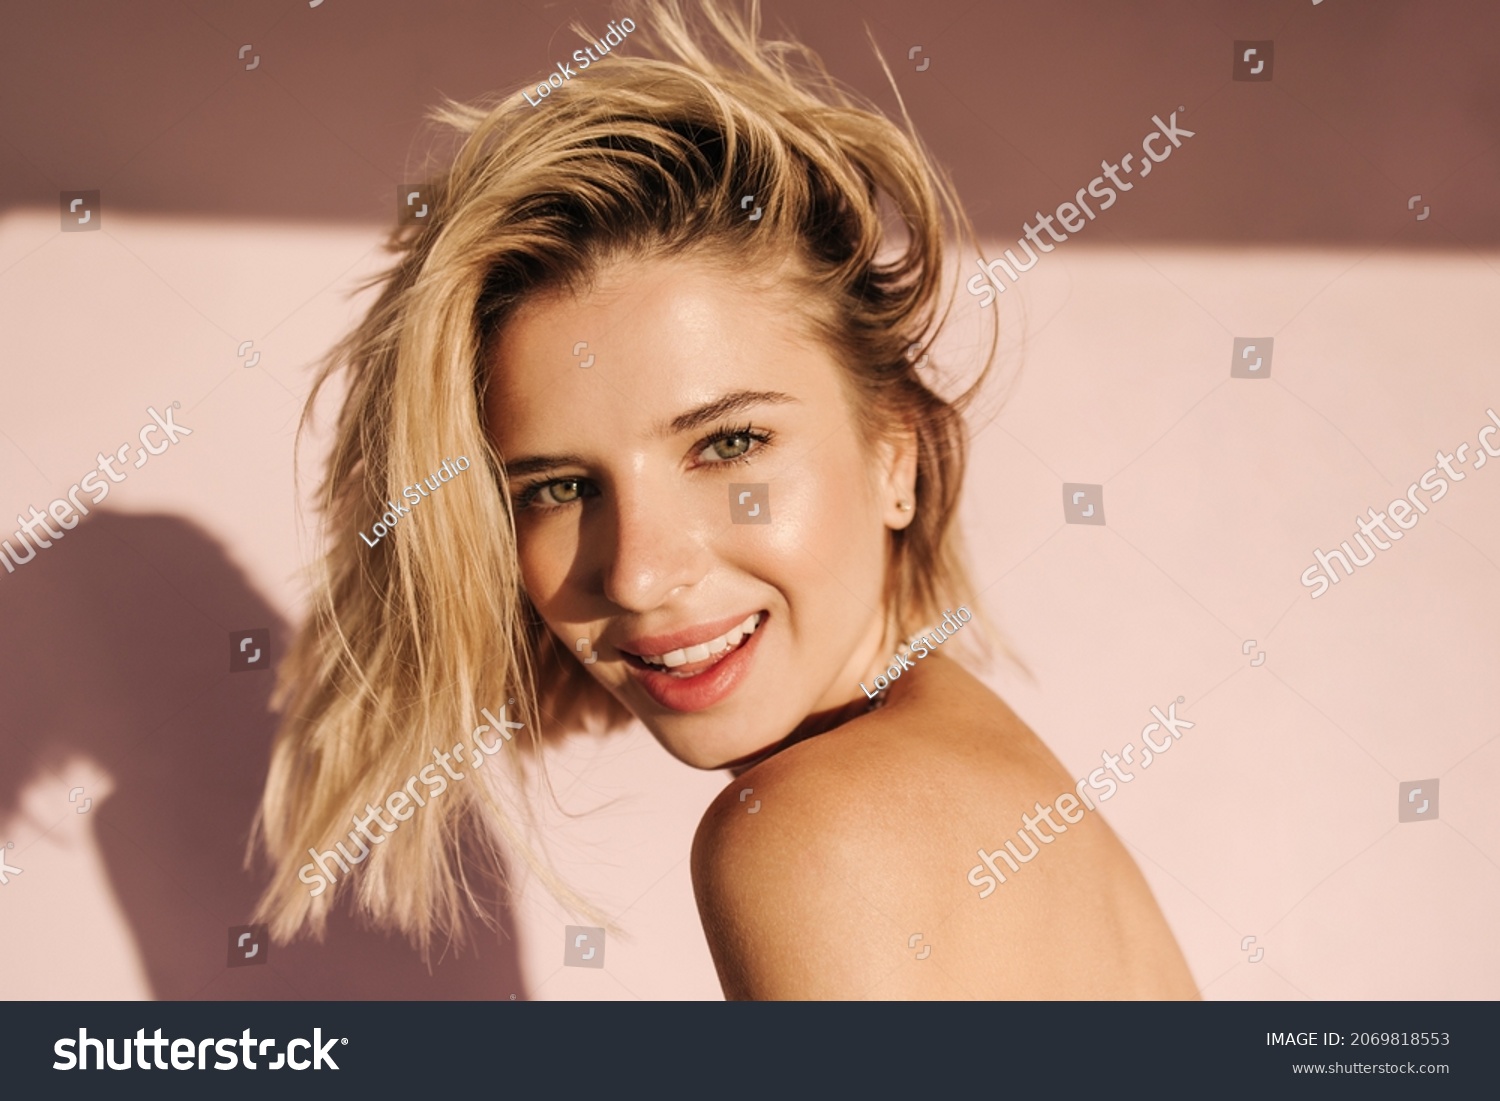 Close up portrait of fair skinned young woman looking at camera with mouth open. Blonde with short hair on one side on pink background with bare shoulders. People sincere emotions lifestyle concept. #2069818553